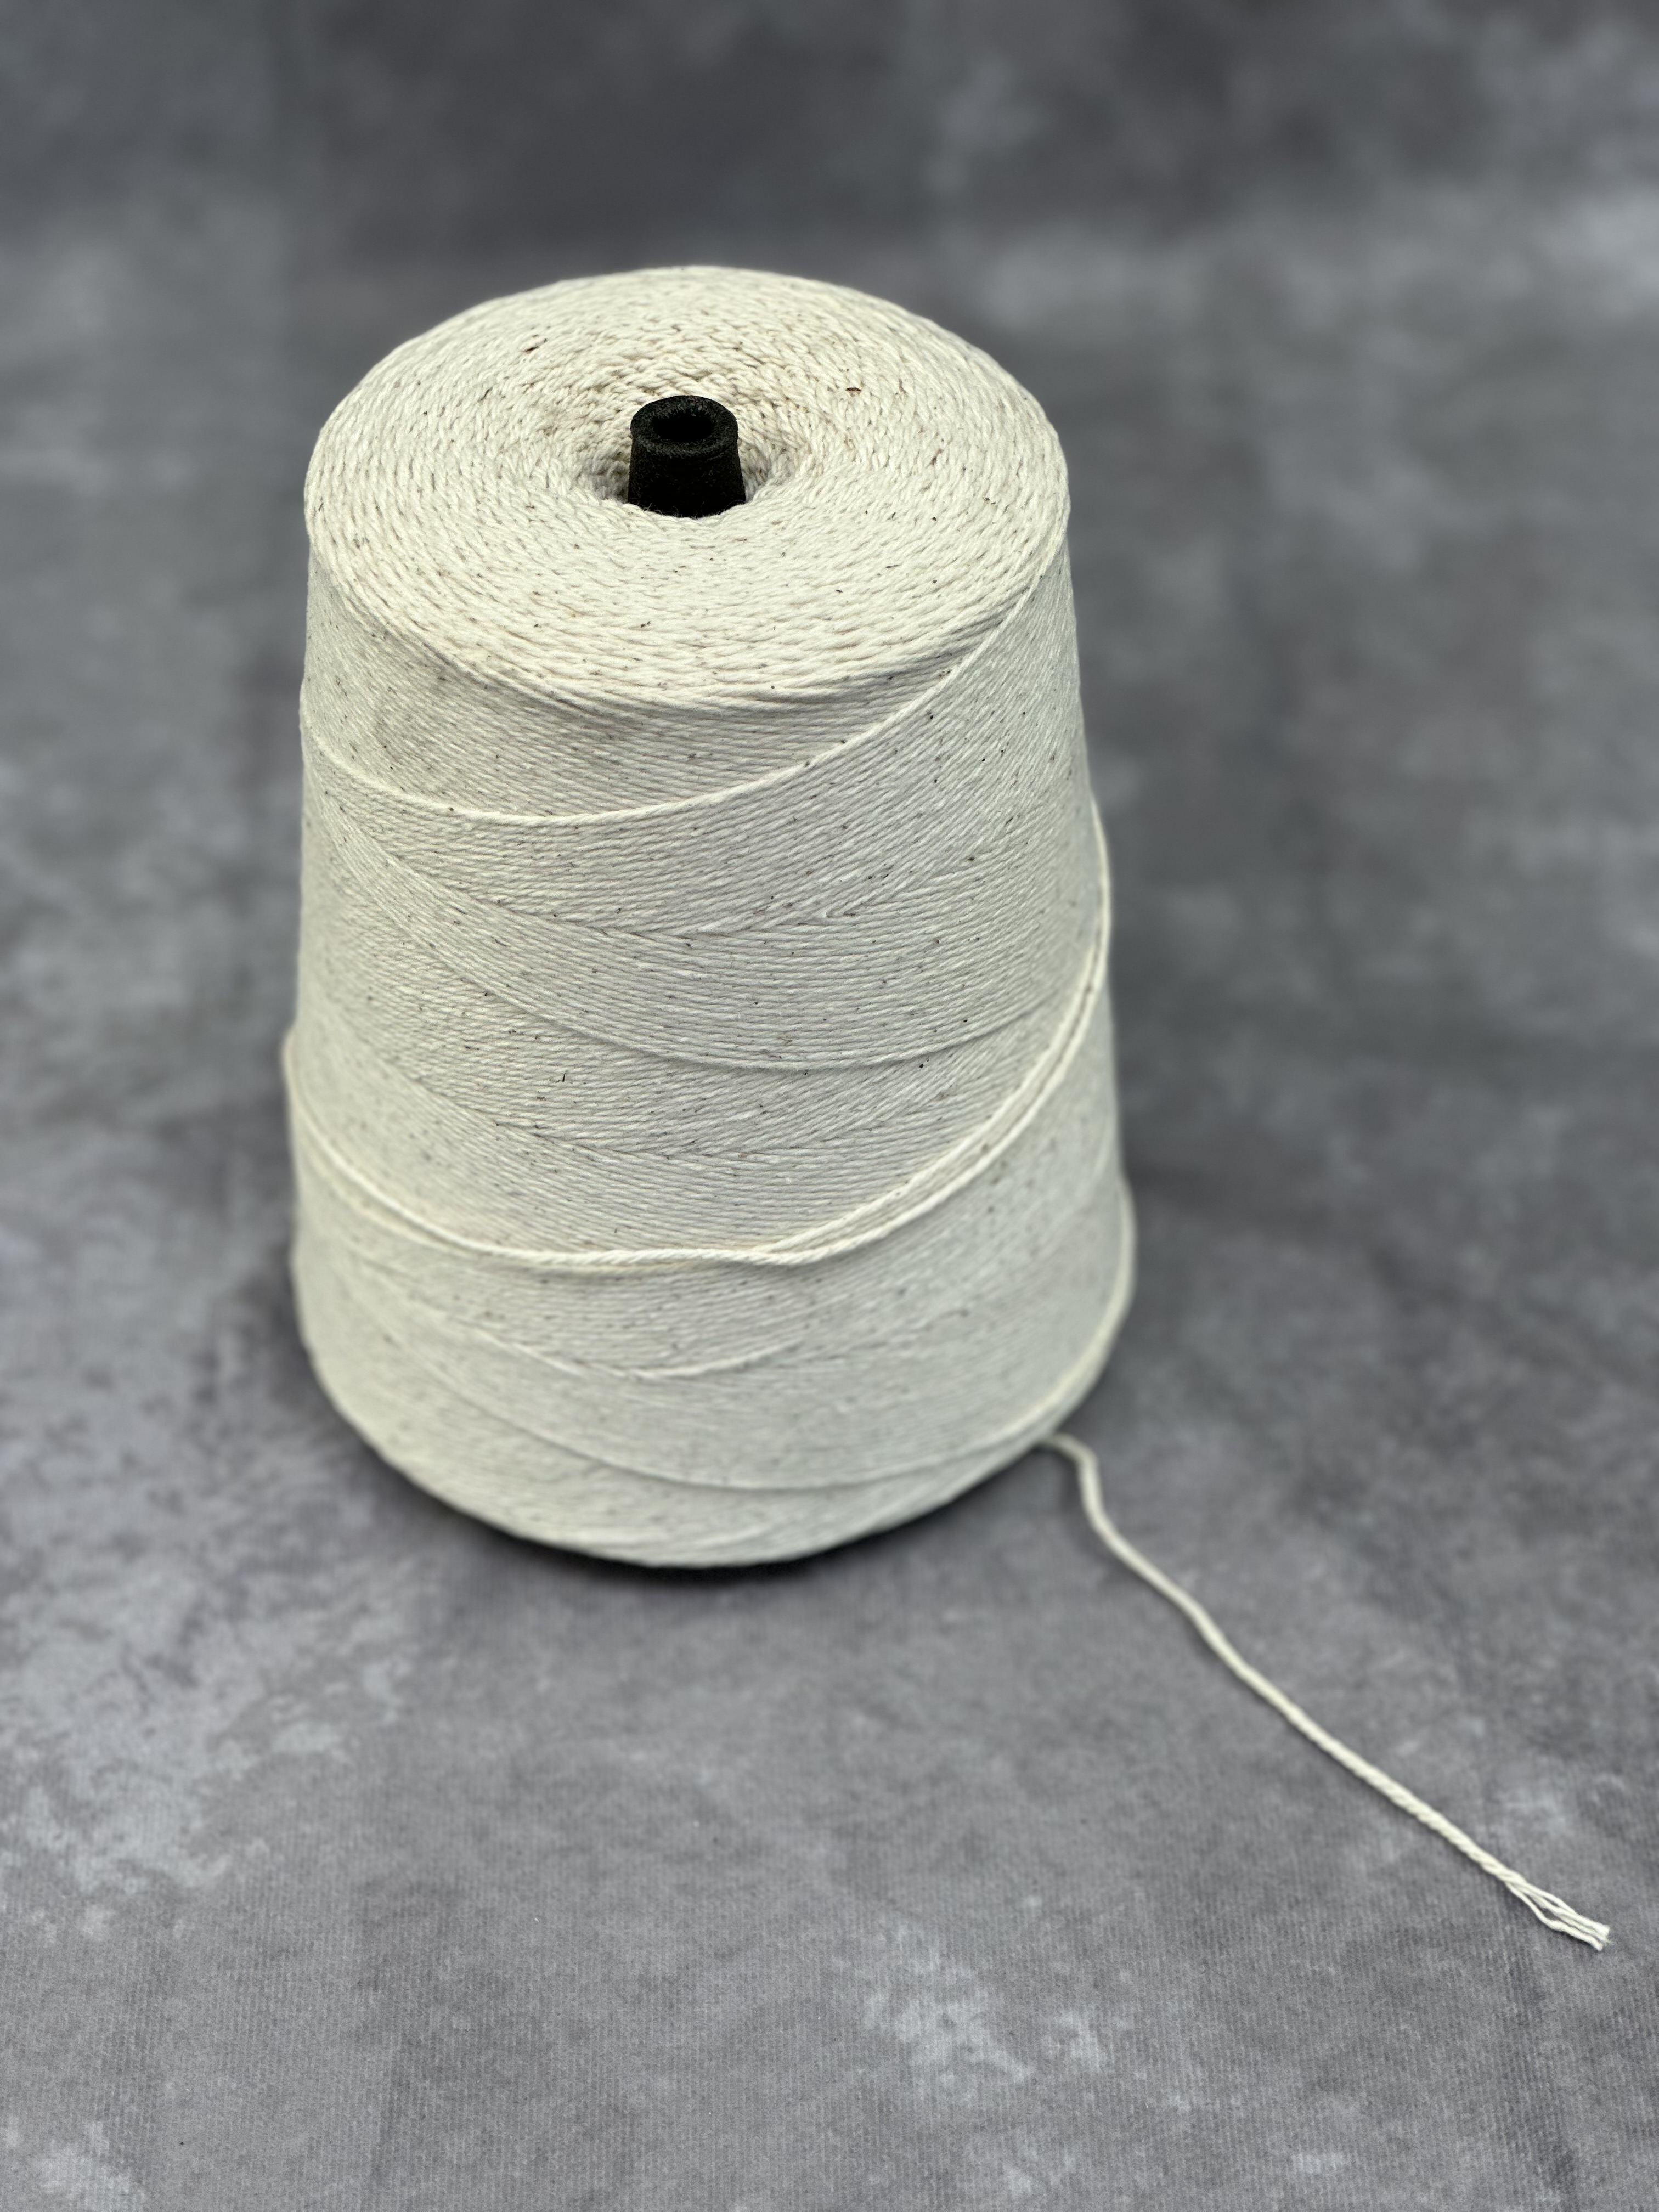 Cotton/Polyester Blend Twine 8's (6 Ply x 2LB Cone)